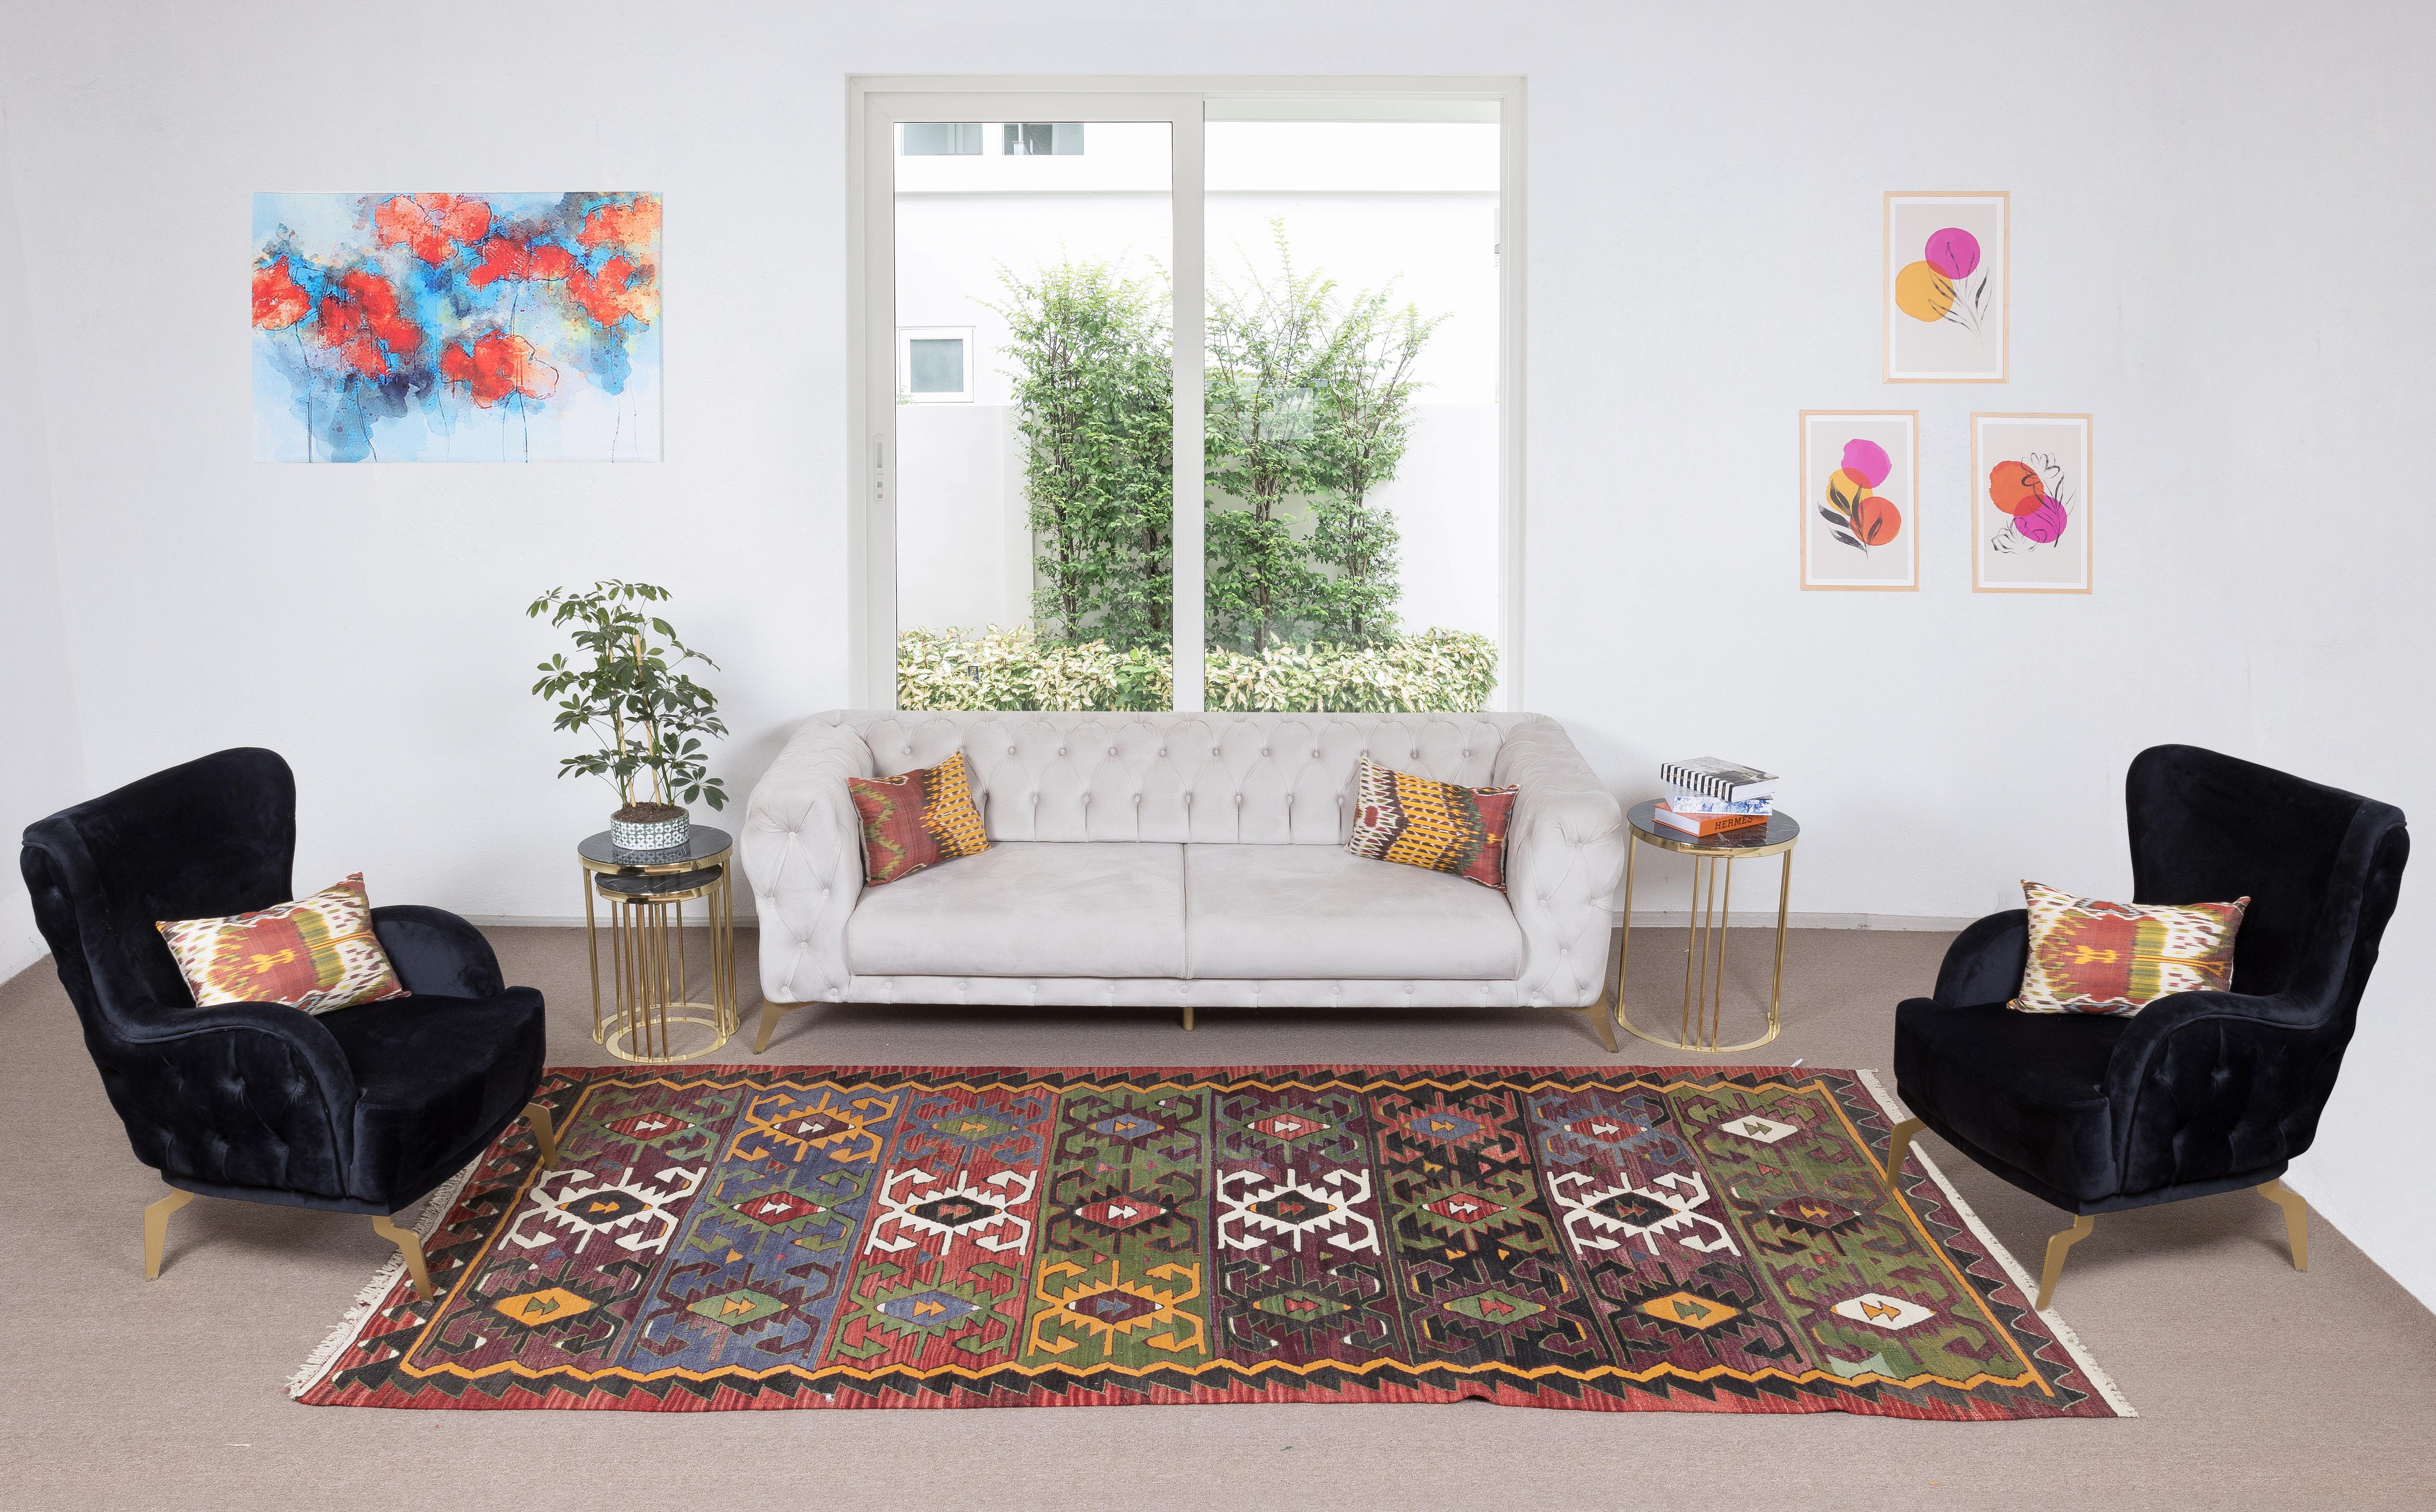 This authentic hand-woven rug made to be used by the villagers in Central Anatolia. 100% organic wool. 
Good condition and cleaned professionally.
Ideal for both residential and commercial interiors.
We can supply a suitable rug-pad if requested for